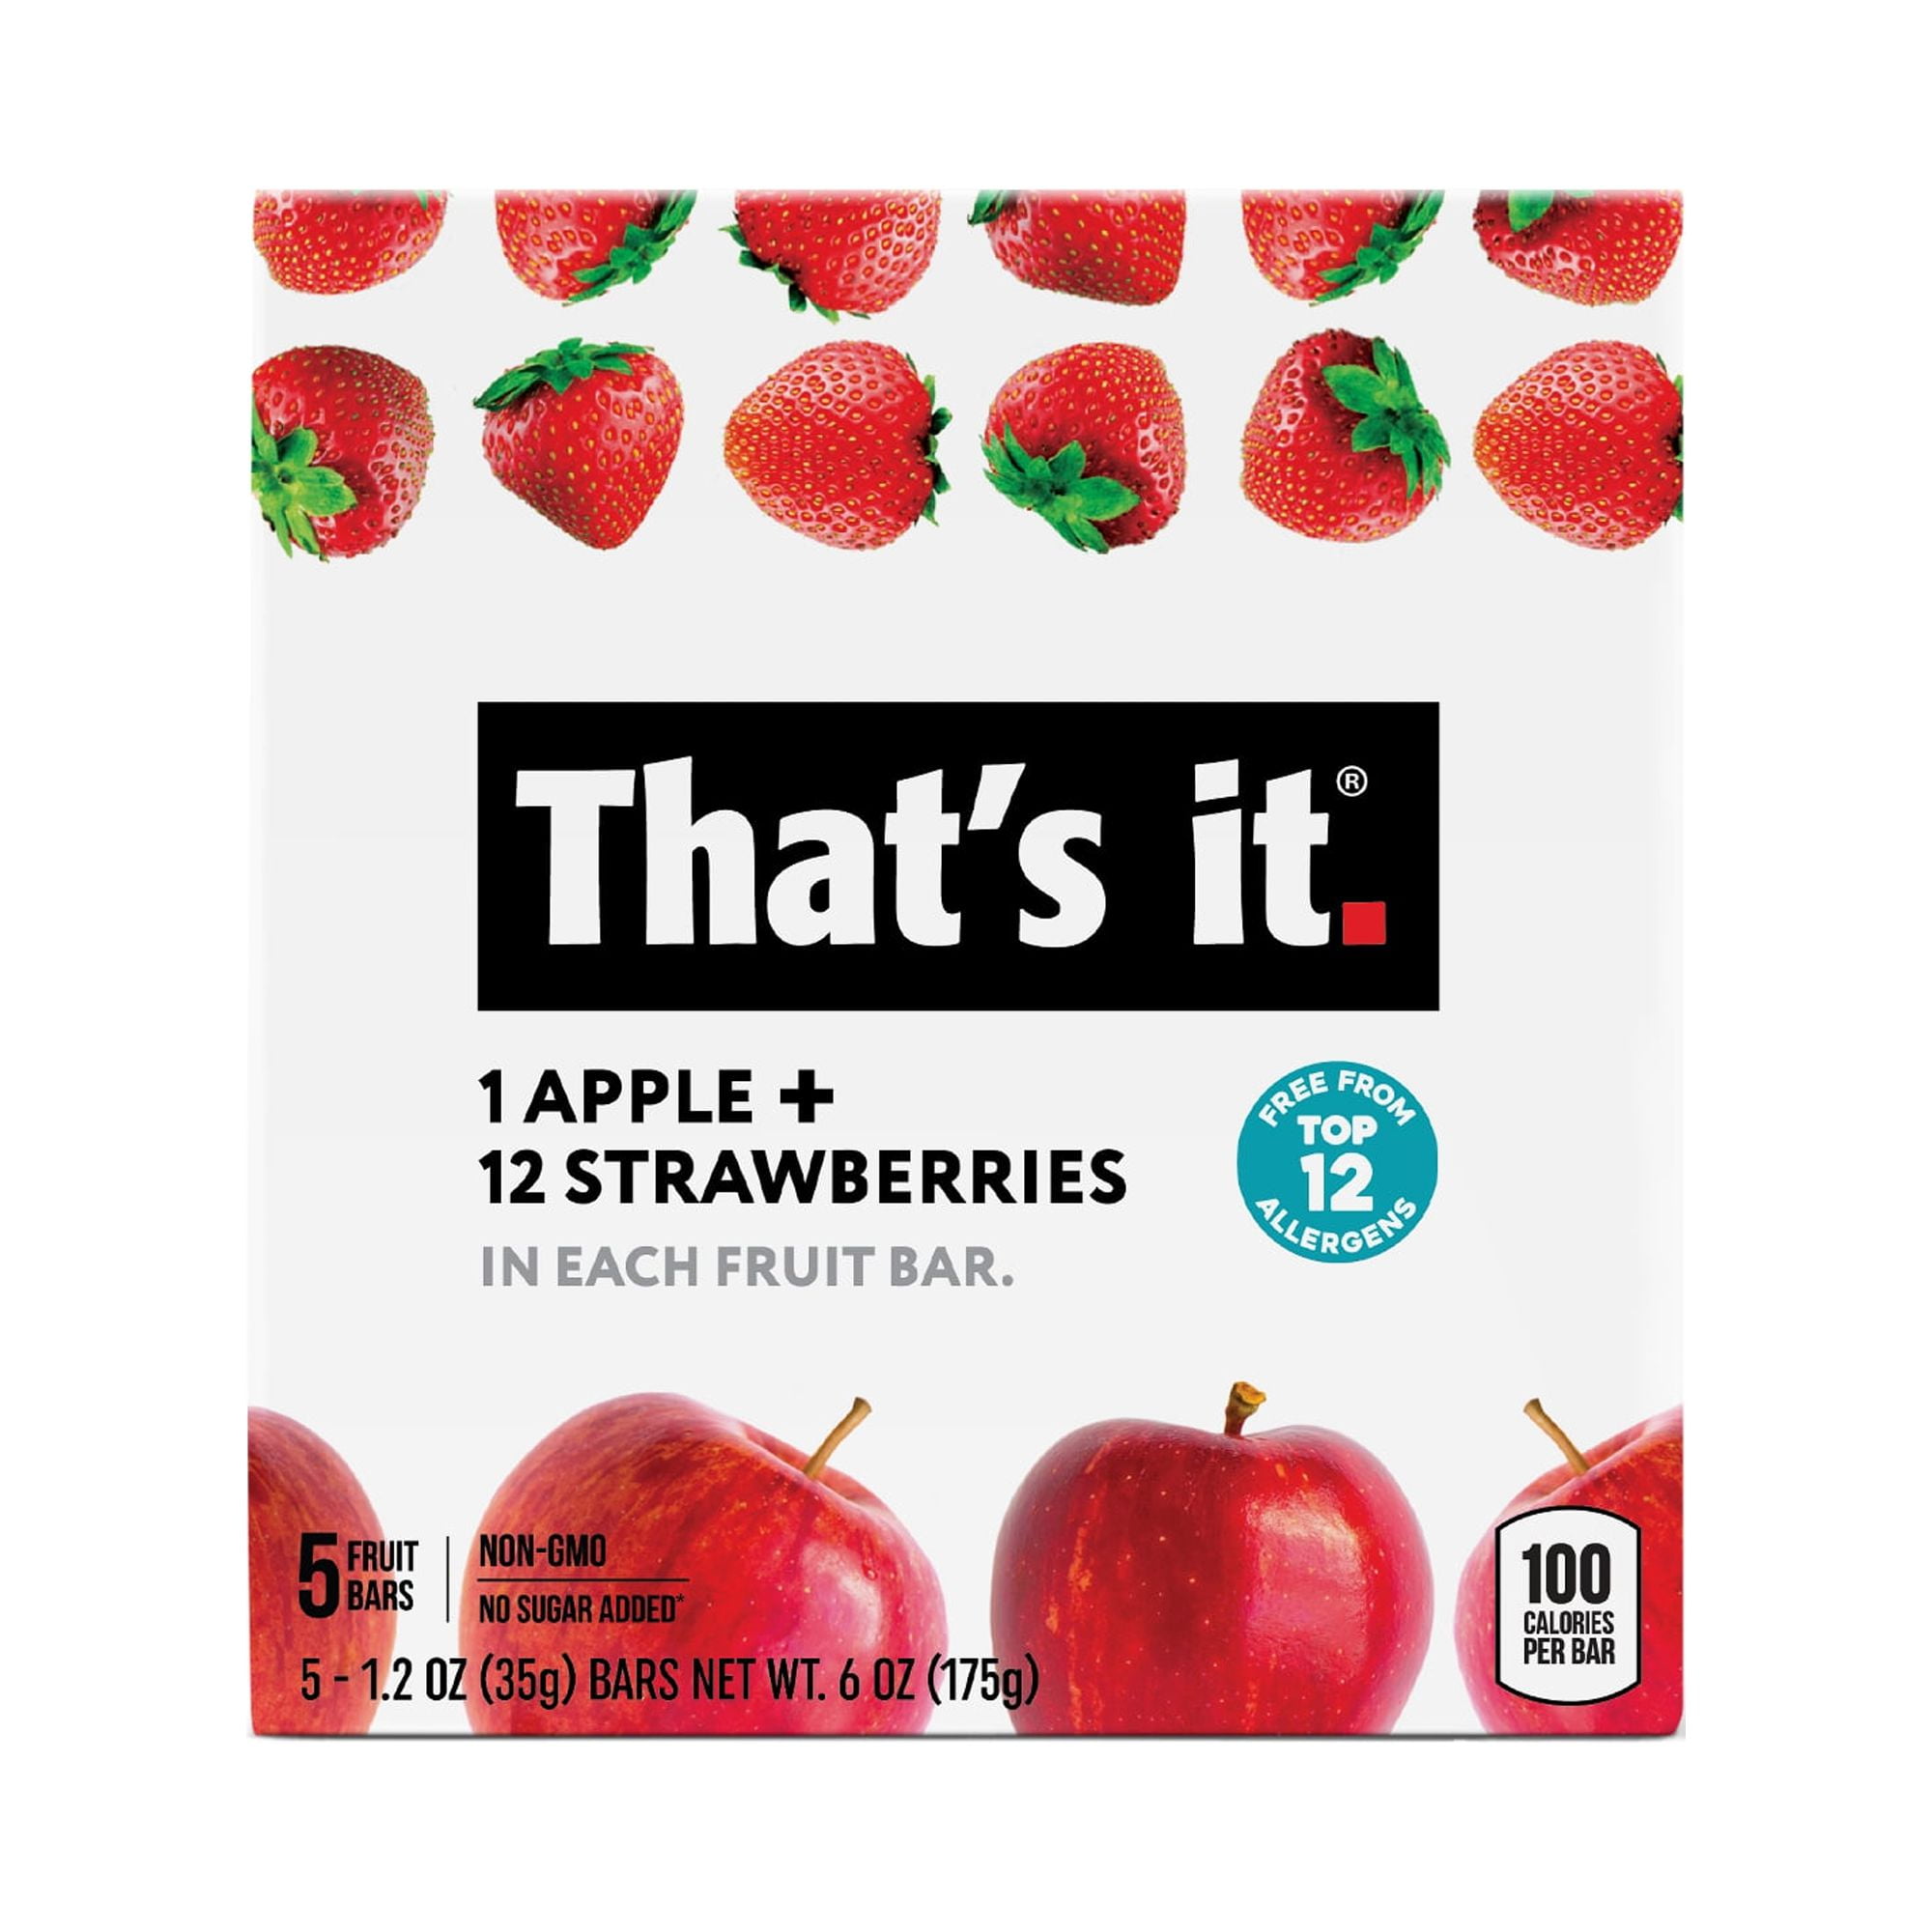  That's It Nutrition Apples + Banana 100% Natural Real Fruit  Bar, Paleo for Children & Adults, Non GMO Sugar-Free, No preservatives  Energy Food, 14.4 Oz, Pack of 12 : Grocery & Gourmet Food